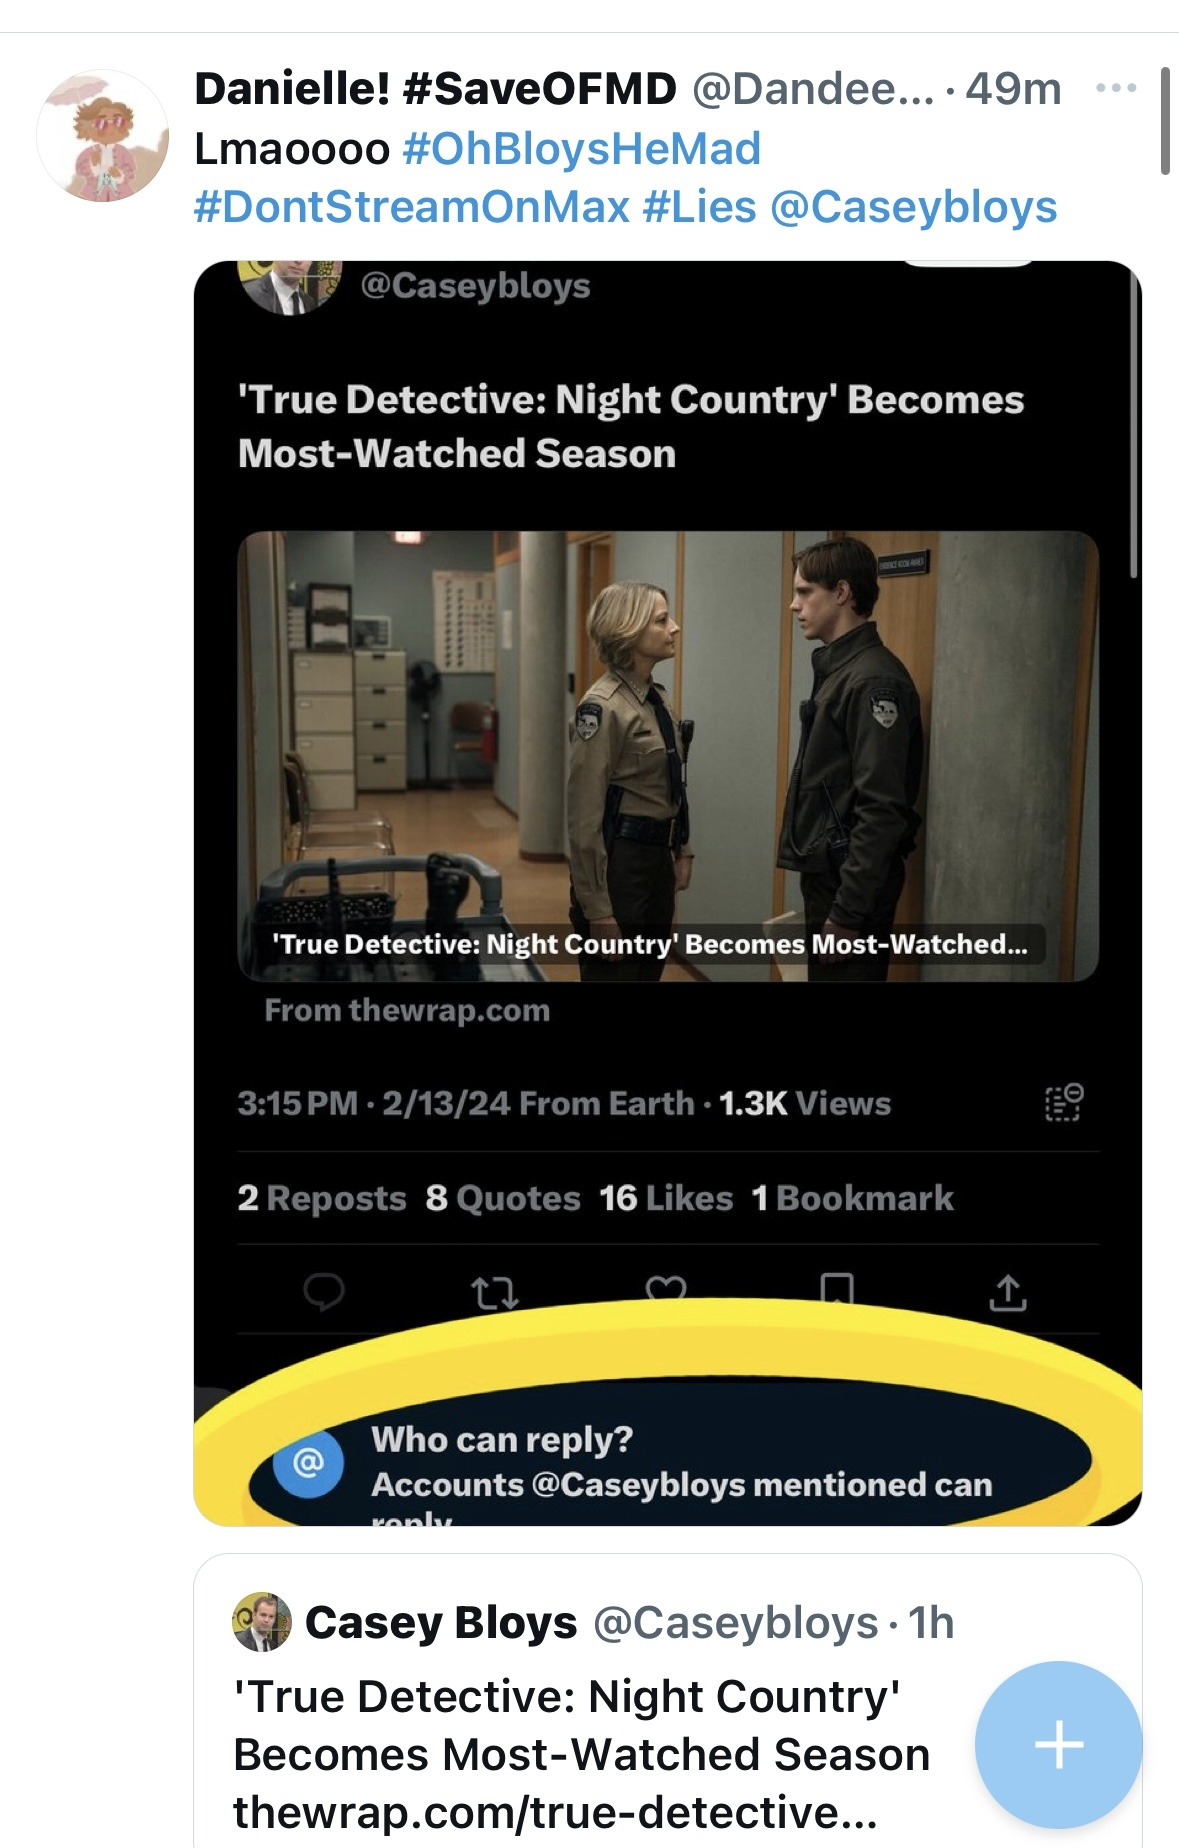 Twitter user Danielle! #SaveOFMD @DandeeCakes Text: Lmaoooo #OhBloysHeMad #DontStreamOnMax #Lies @CaseyBloys Picture: Displays 'True Detective: Night Country' Becomes Most-Watched Season link to a thewrap.com article. Circled is a notification saying: Who can reply? Accounts @Caseybloys mentioned can reply